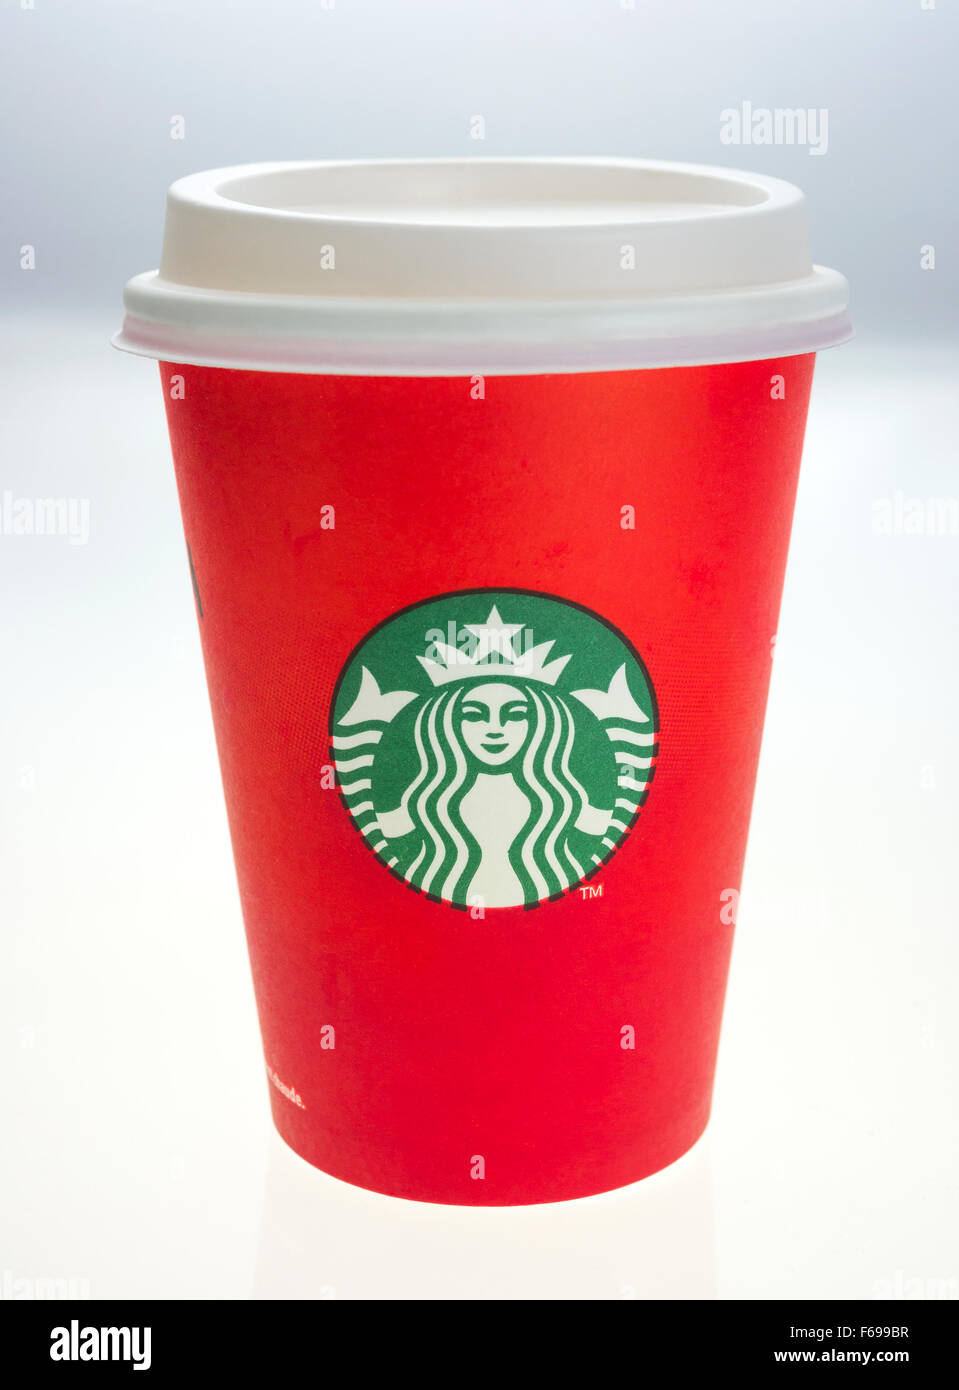 https://c8.alamy.com/comp/F699BR/starbucks-holiday-coffee-cup-for-2015-F699BR.jpg